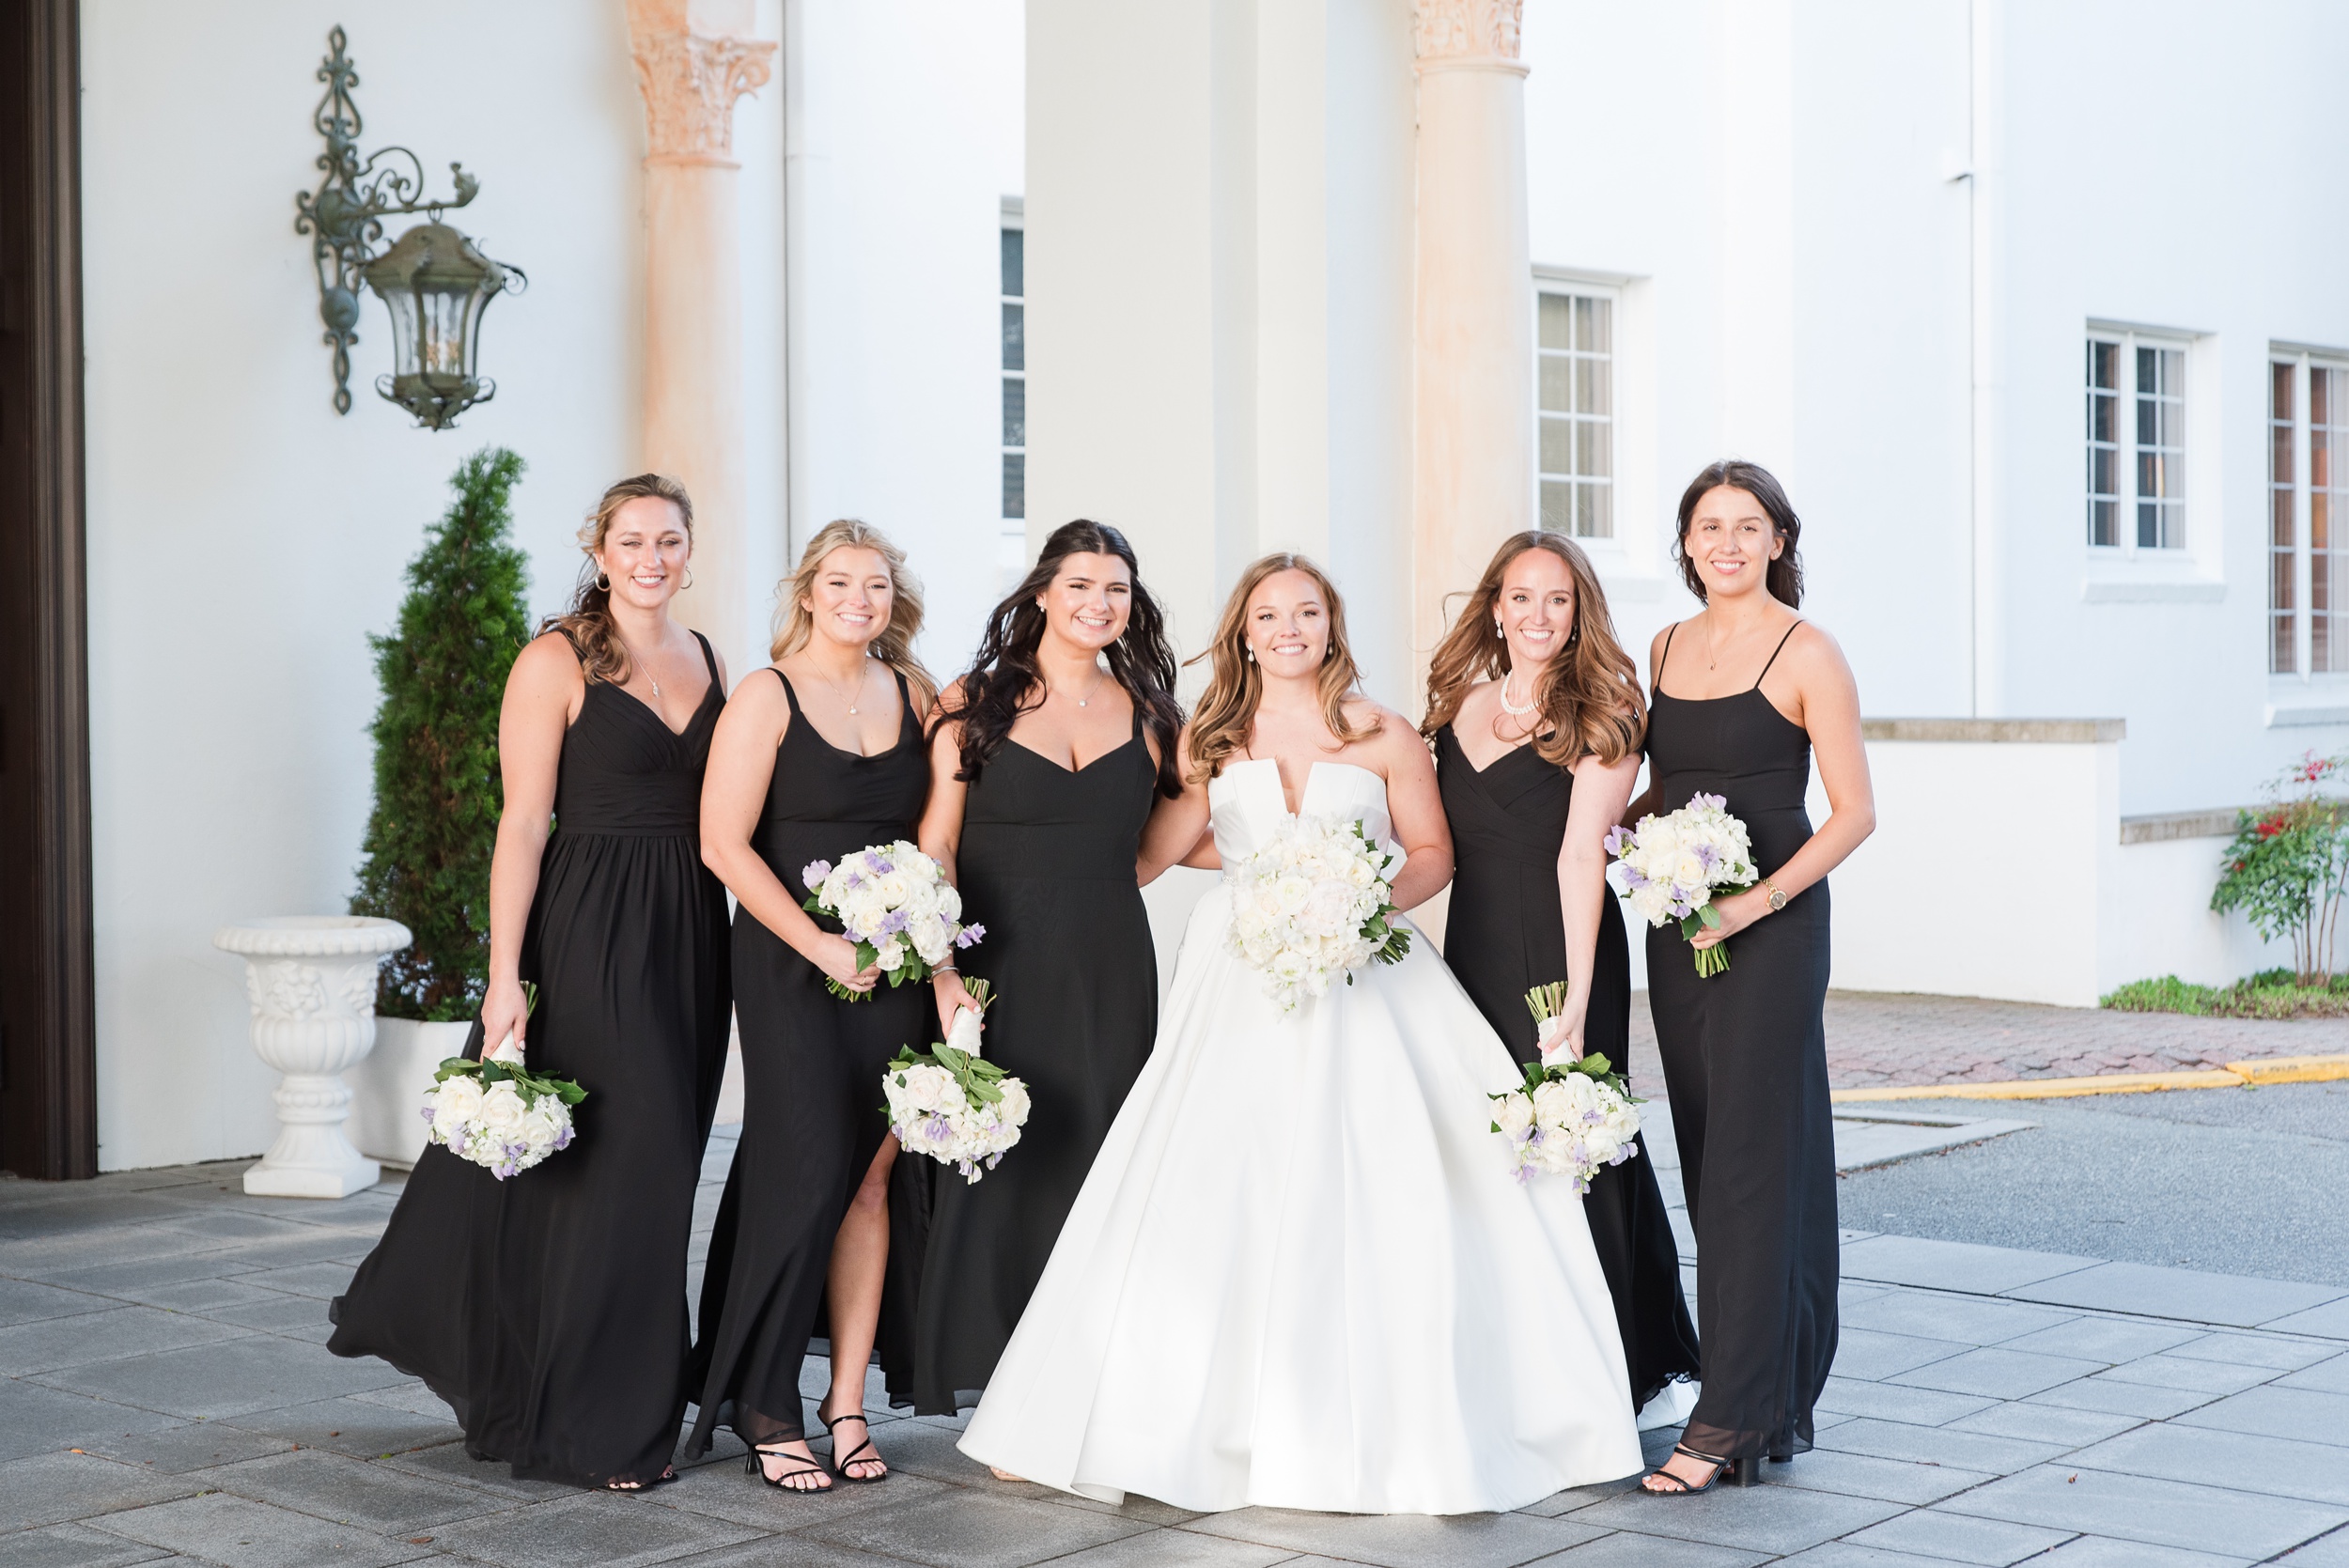 A bride stands with her bridesmaids in black dresses under the driveway cover.